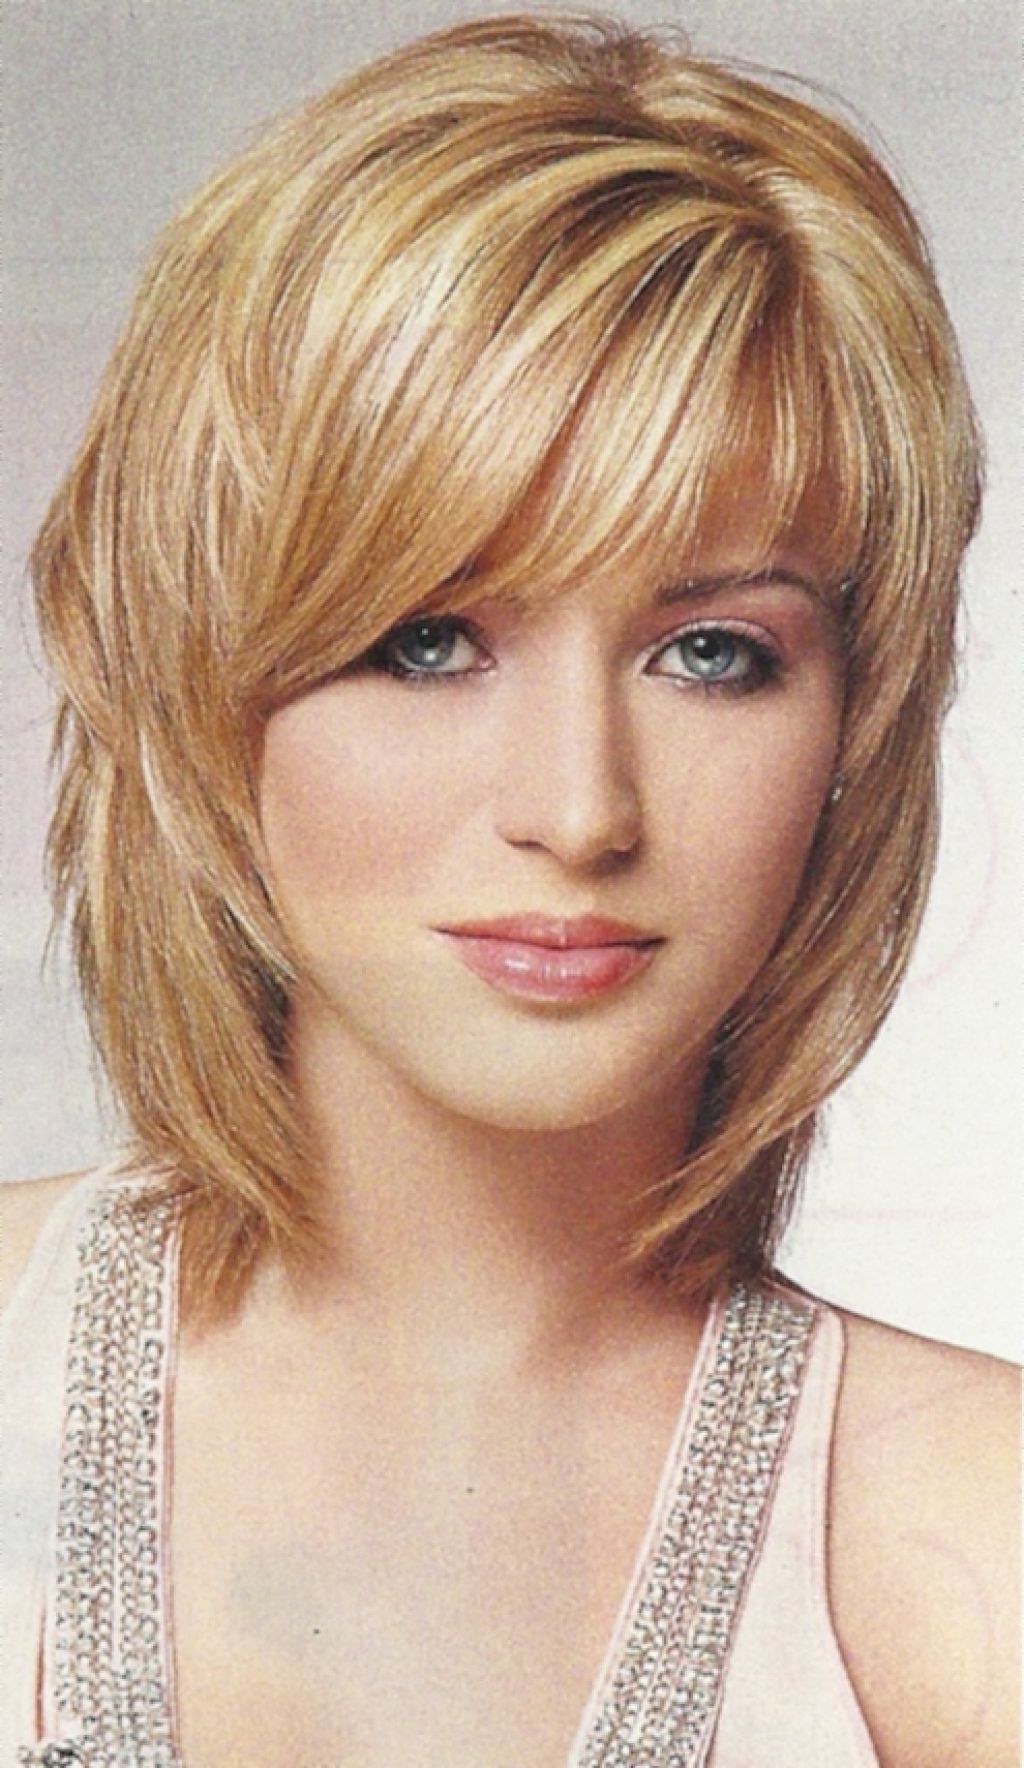 Famous Shaggy Short Hairstyles For Long Faces In Hairstyle For Medium Short Hair – Hairstyle For Women & Man (View 3 of 15)